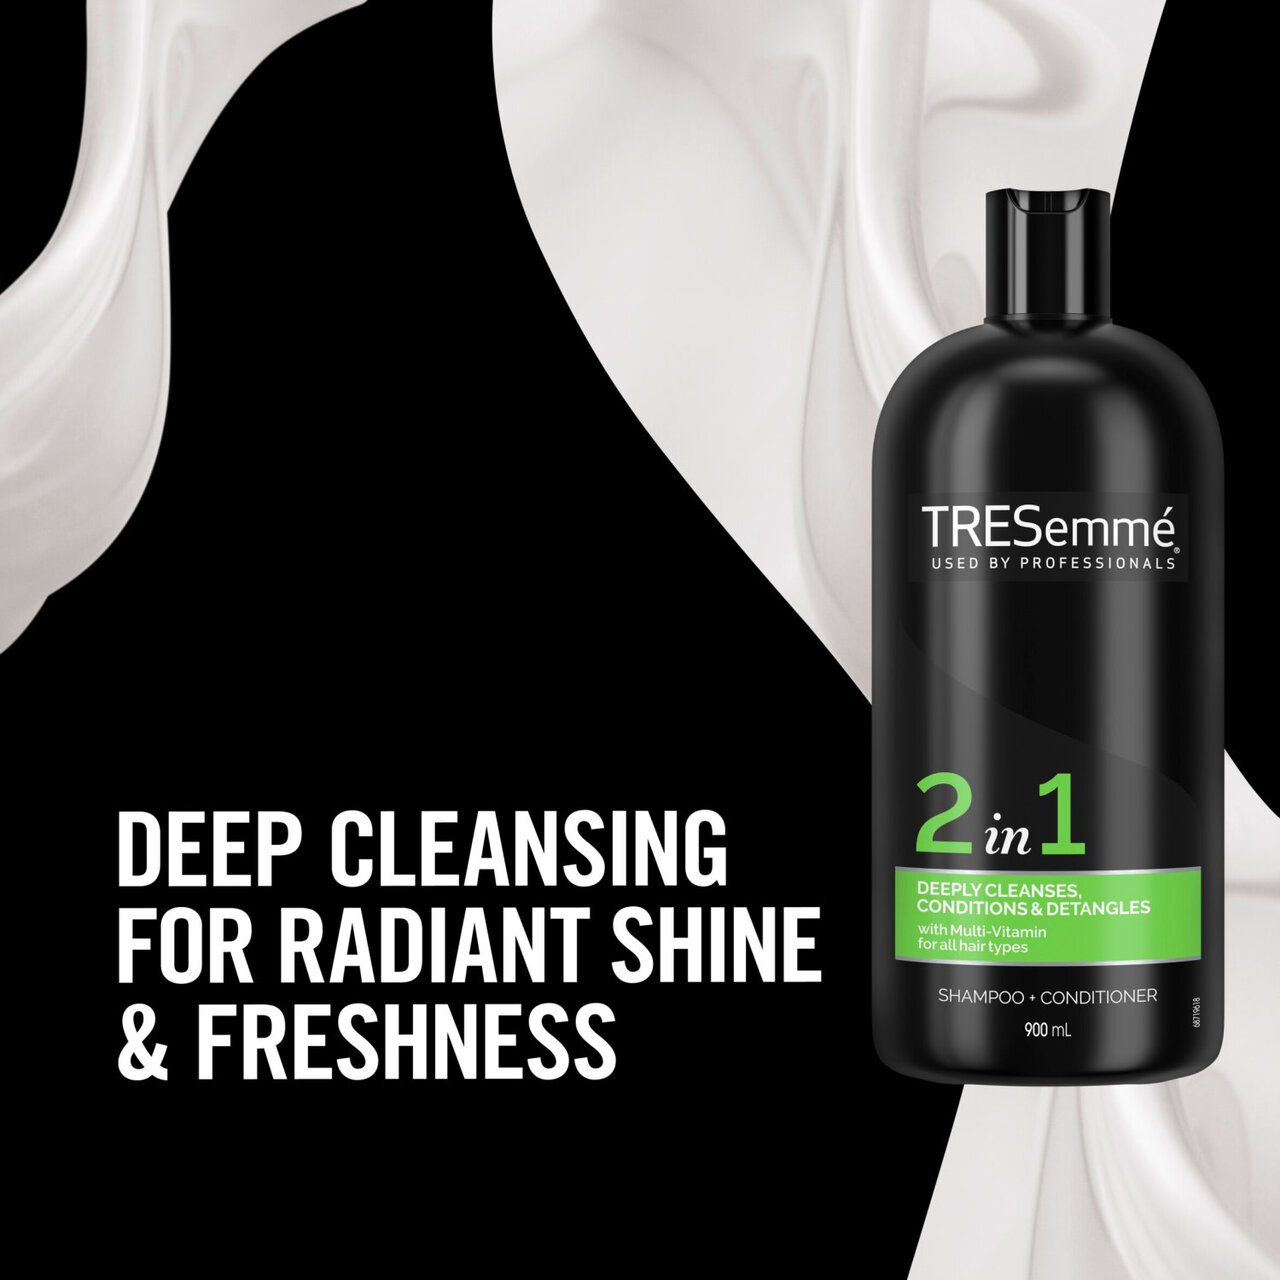 Tresemme 2 in 1 Cleanses & Conditions Shampoo & Conditioner 900ml